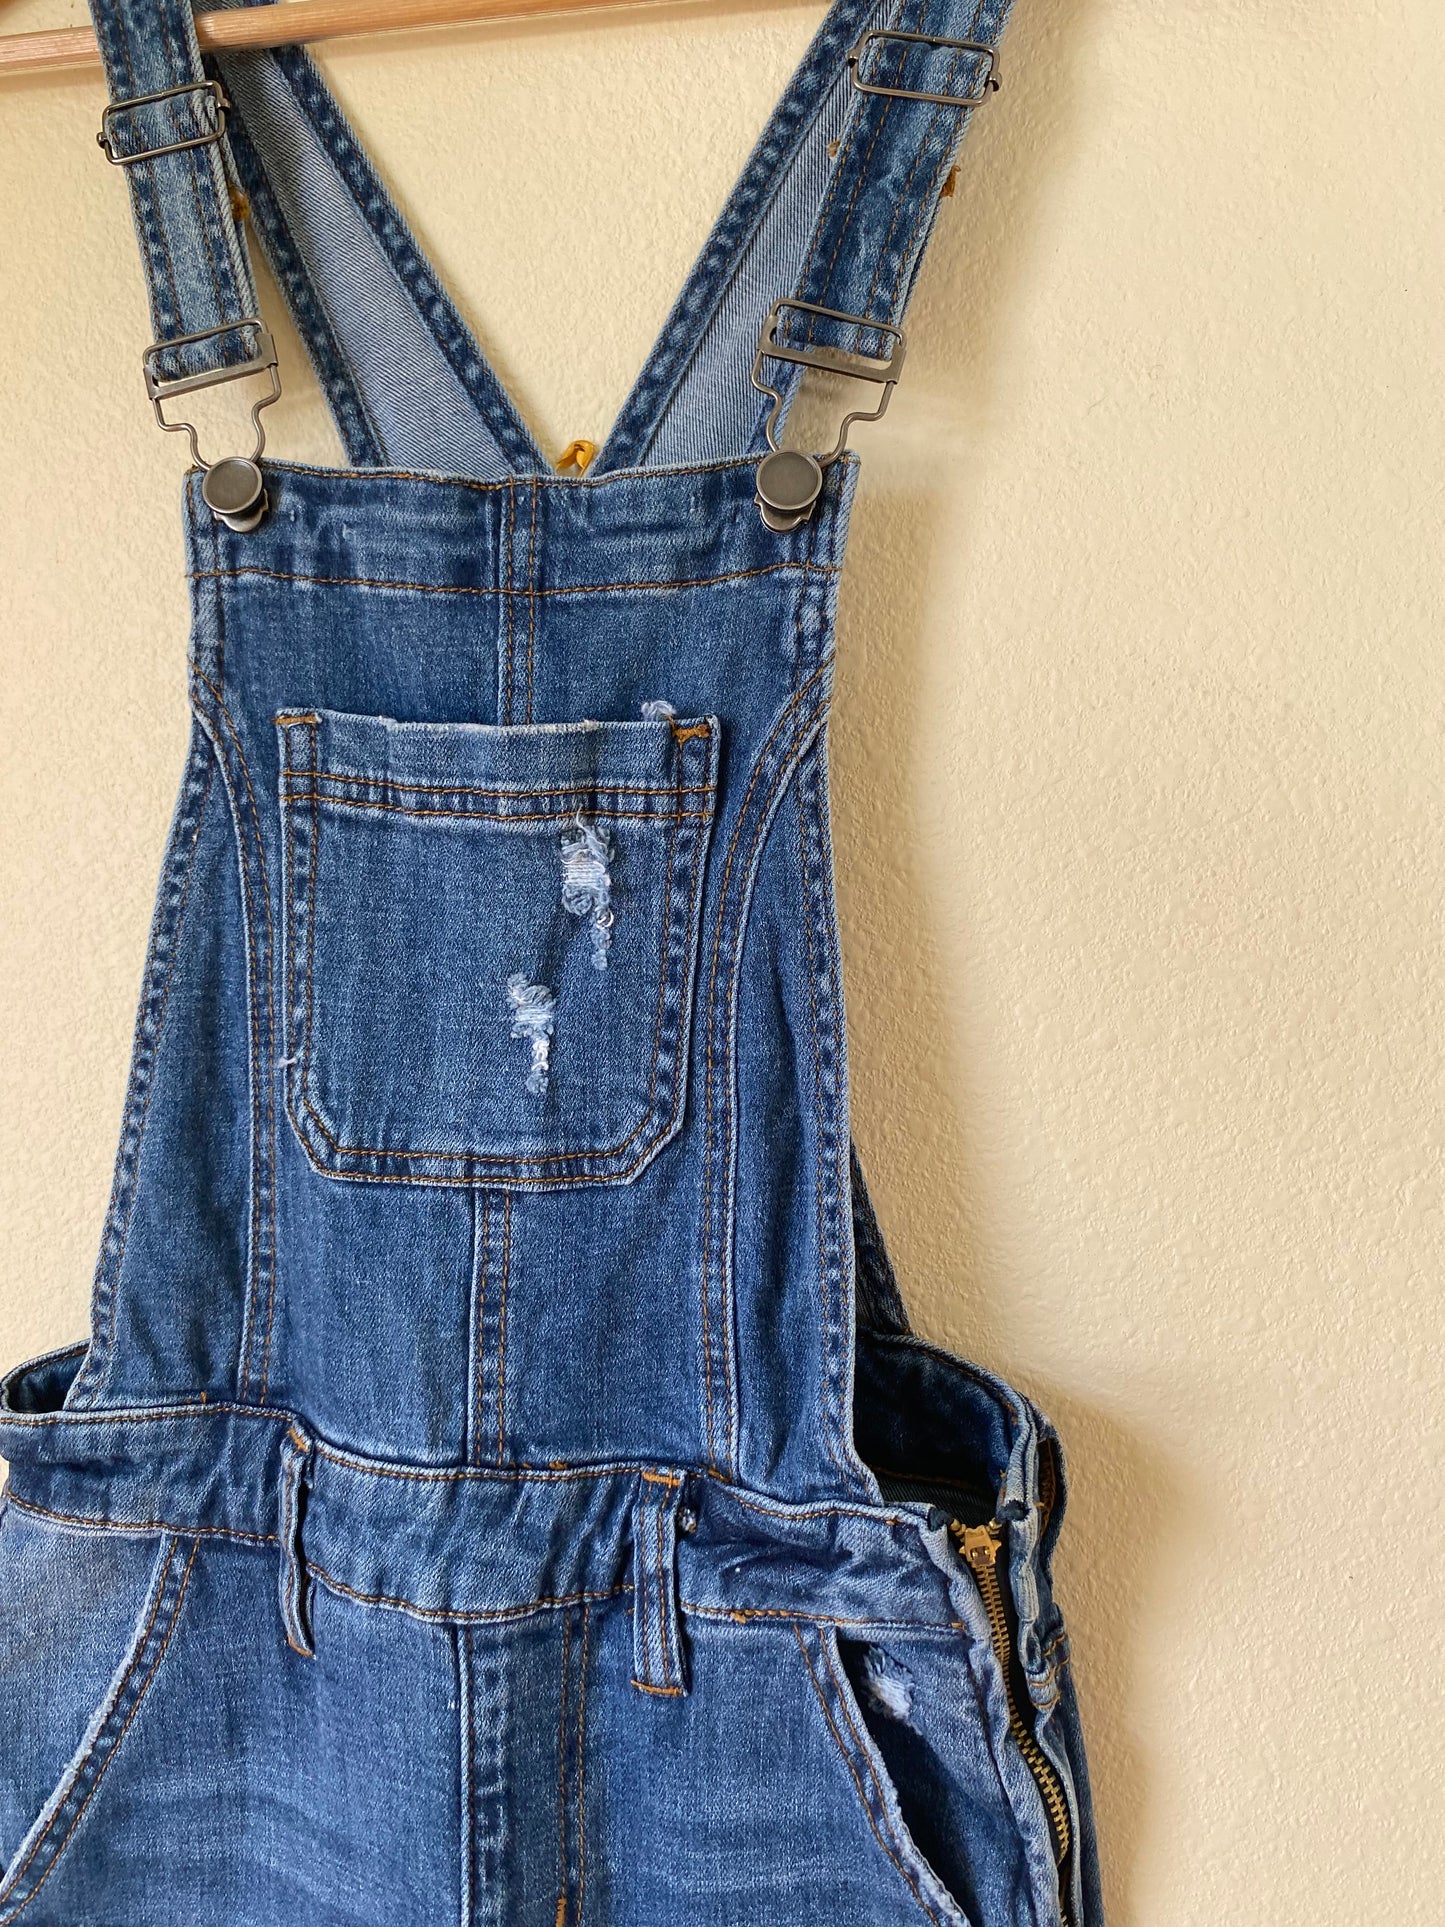 Fitted Flare Wide Leg Overalls XSMALL/SMALL